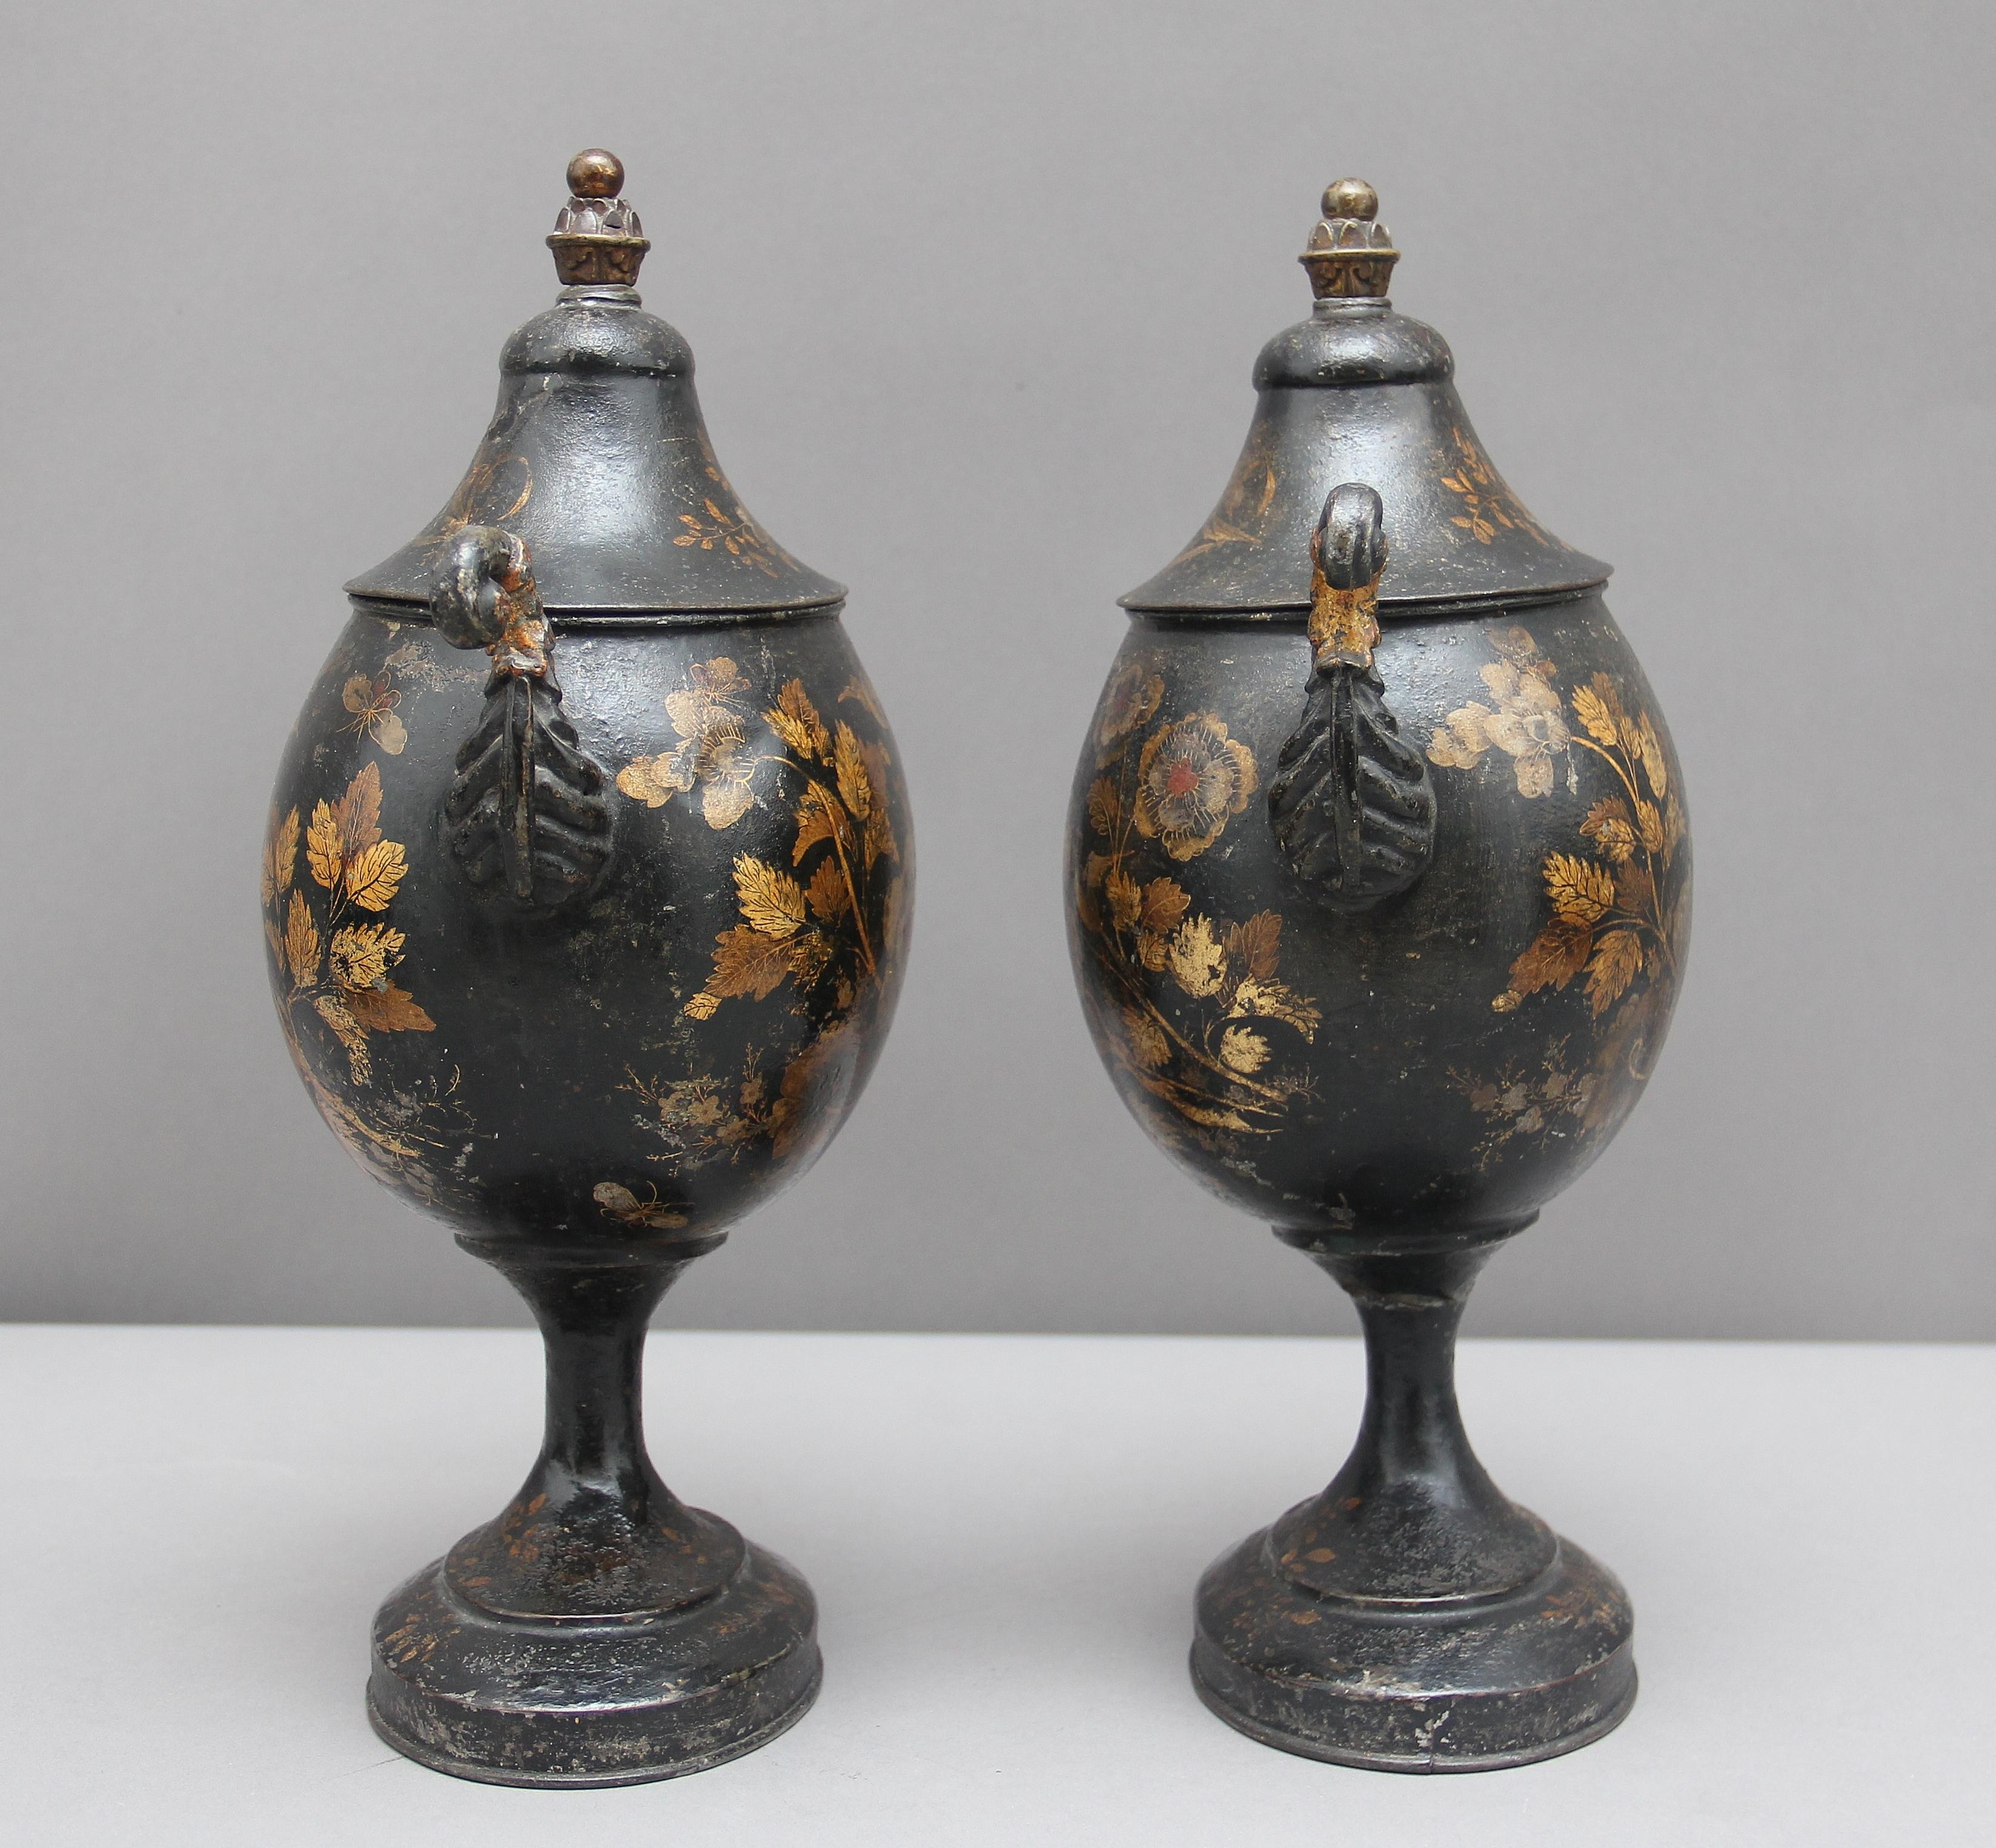 Tôle Pair of Early 19th Century Tole Chestnut Urns